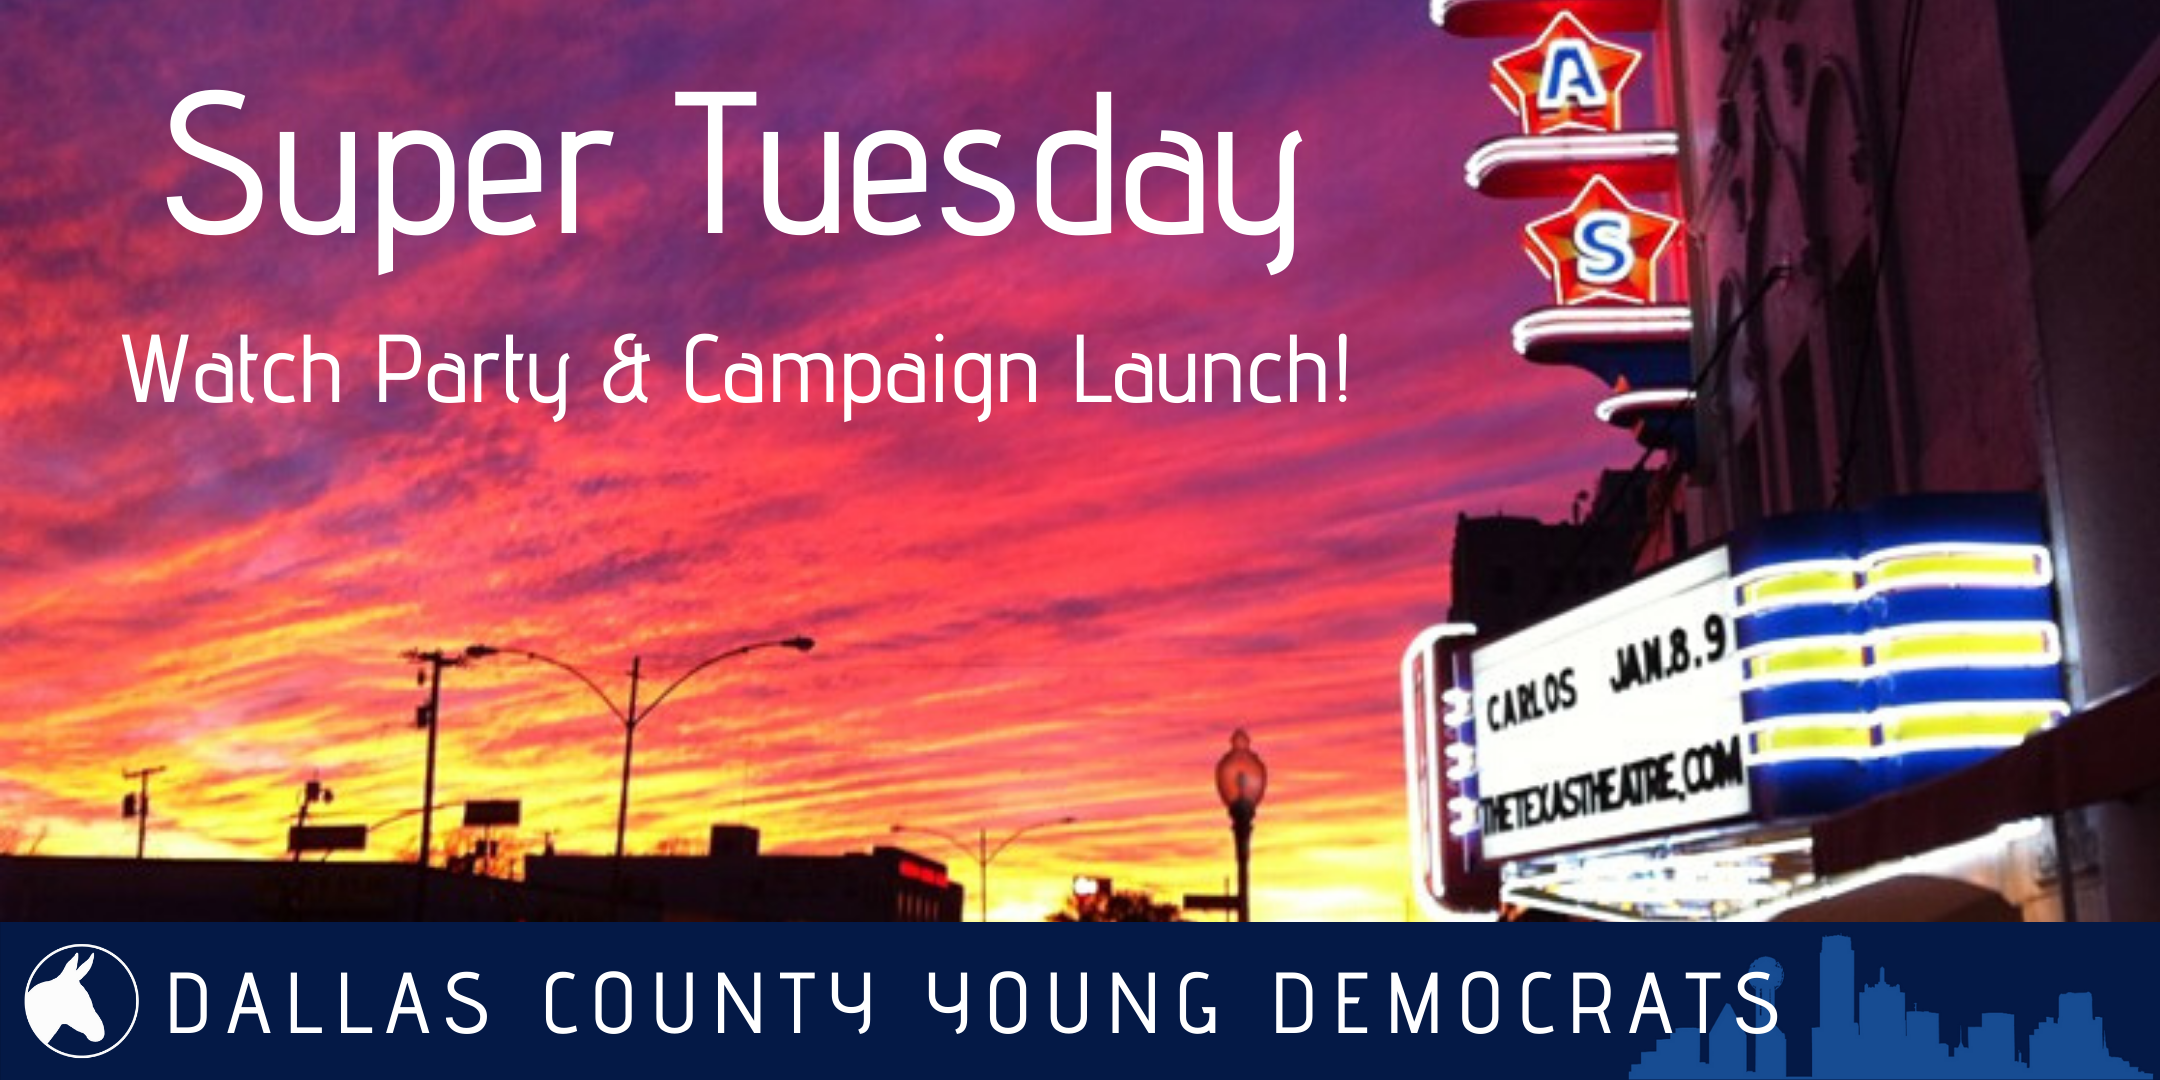 Super Tuesday Watch Party